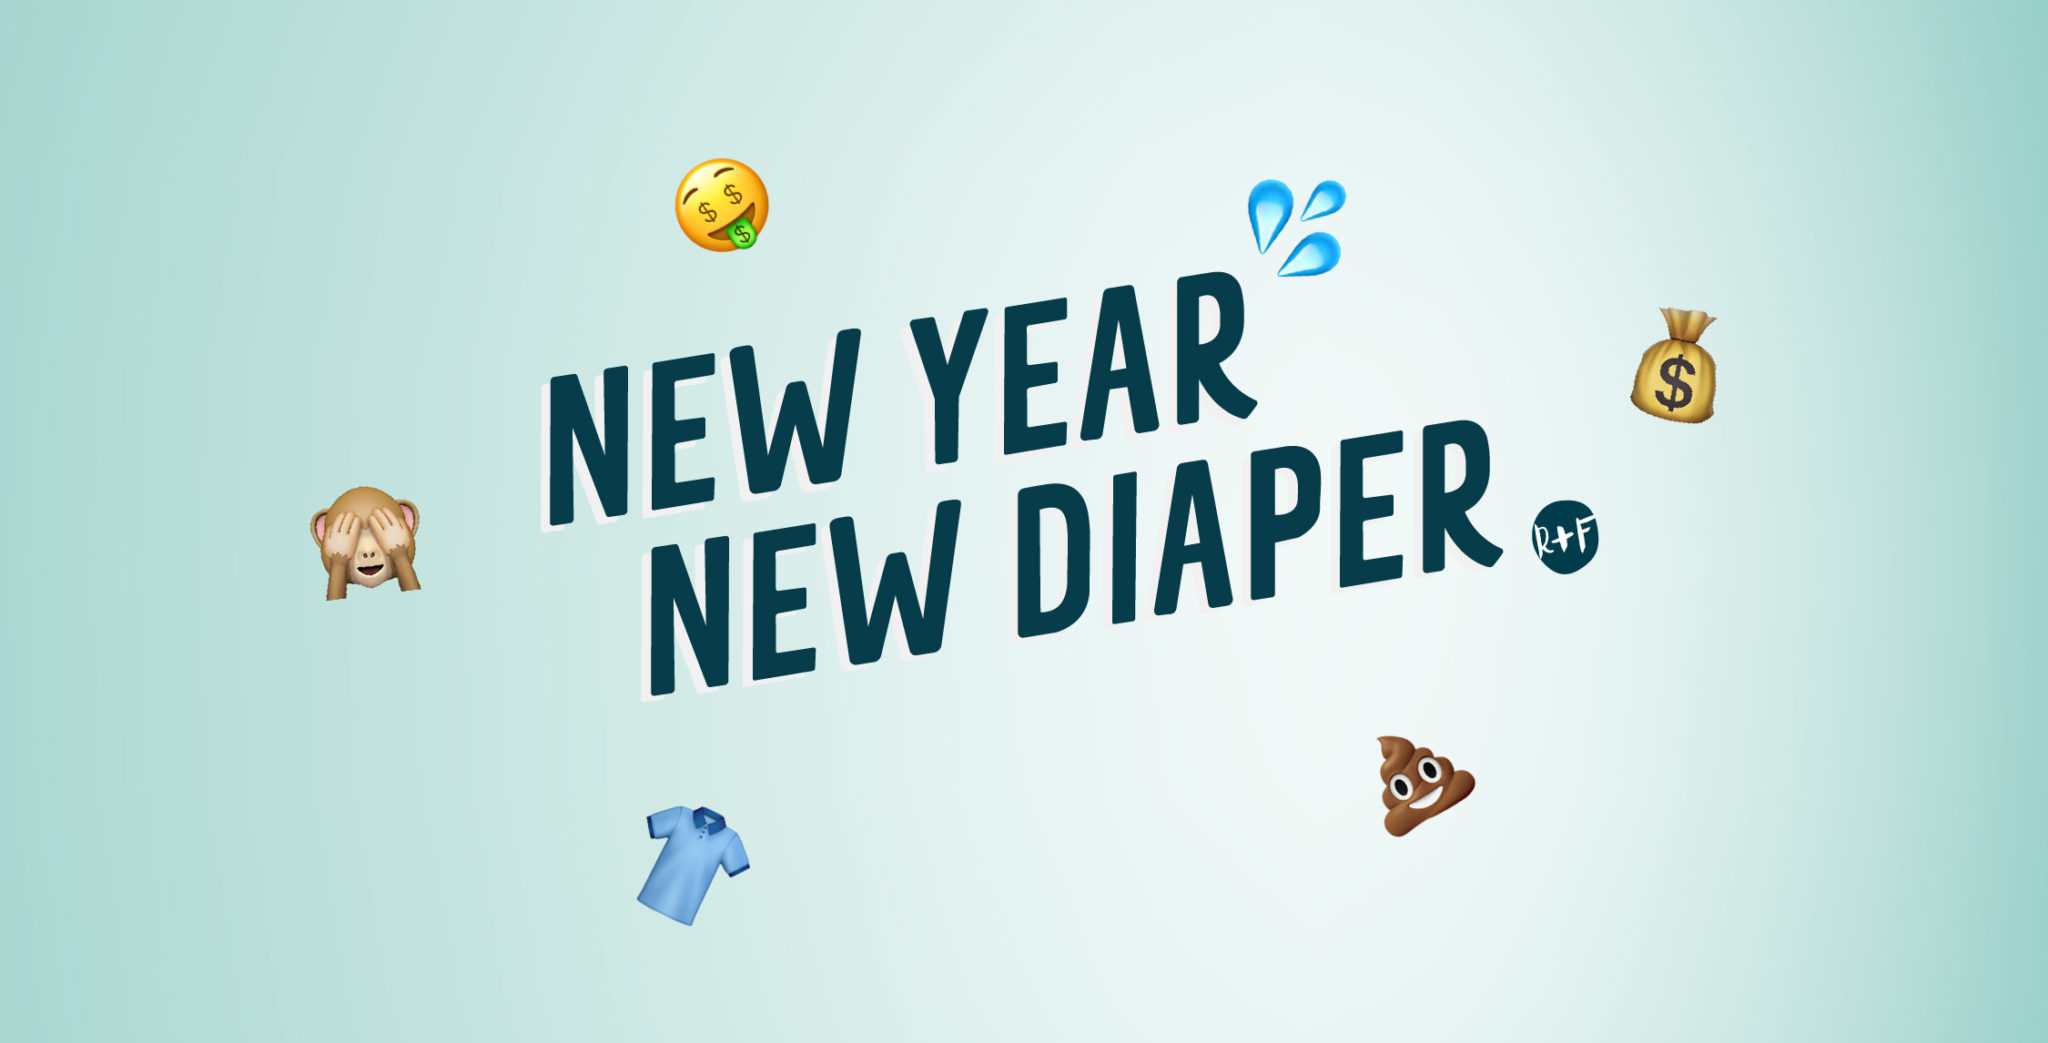 Why you should switch diaper brands this year